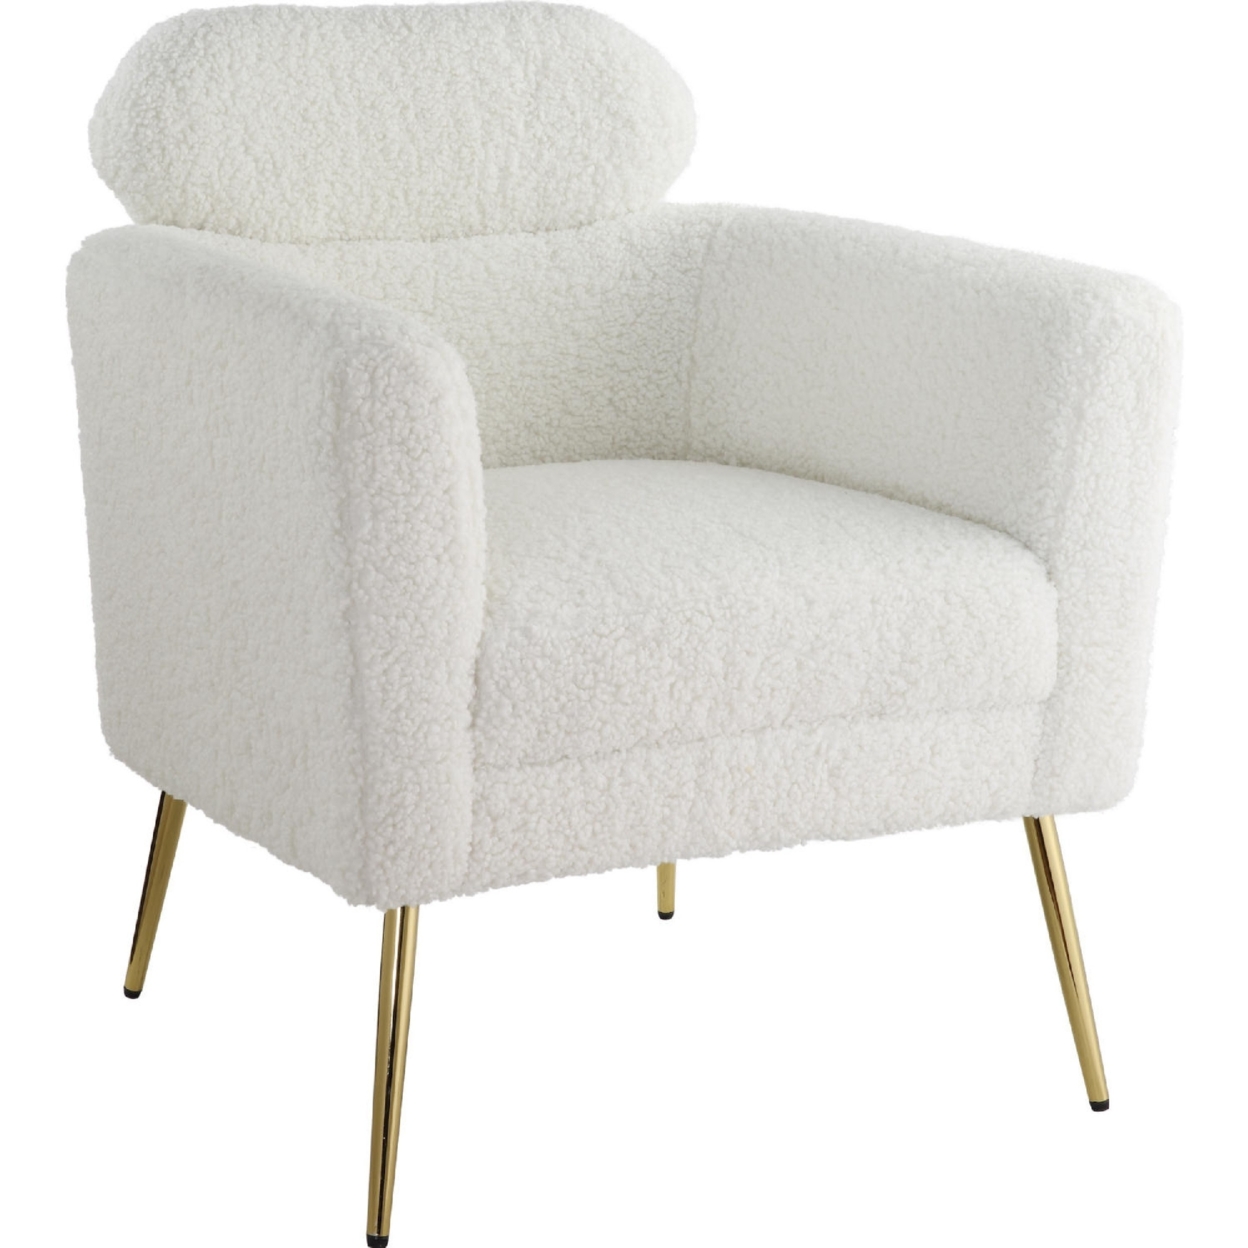 Accent Chair With Textured Fabric And Sleek Metal Legs, White And Gold- Saltoro Sherpi